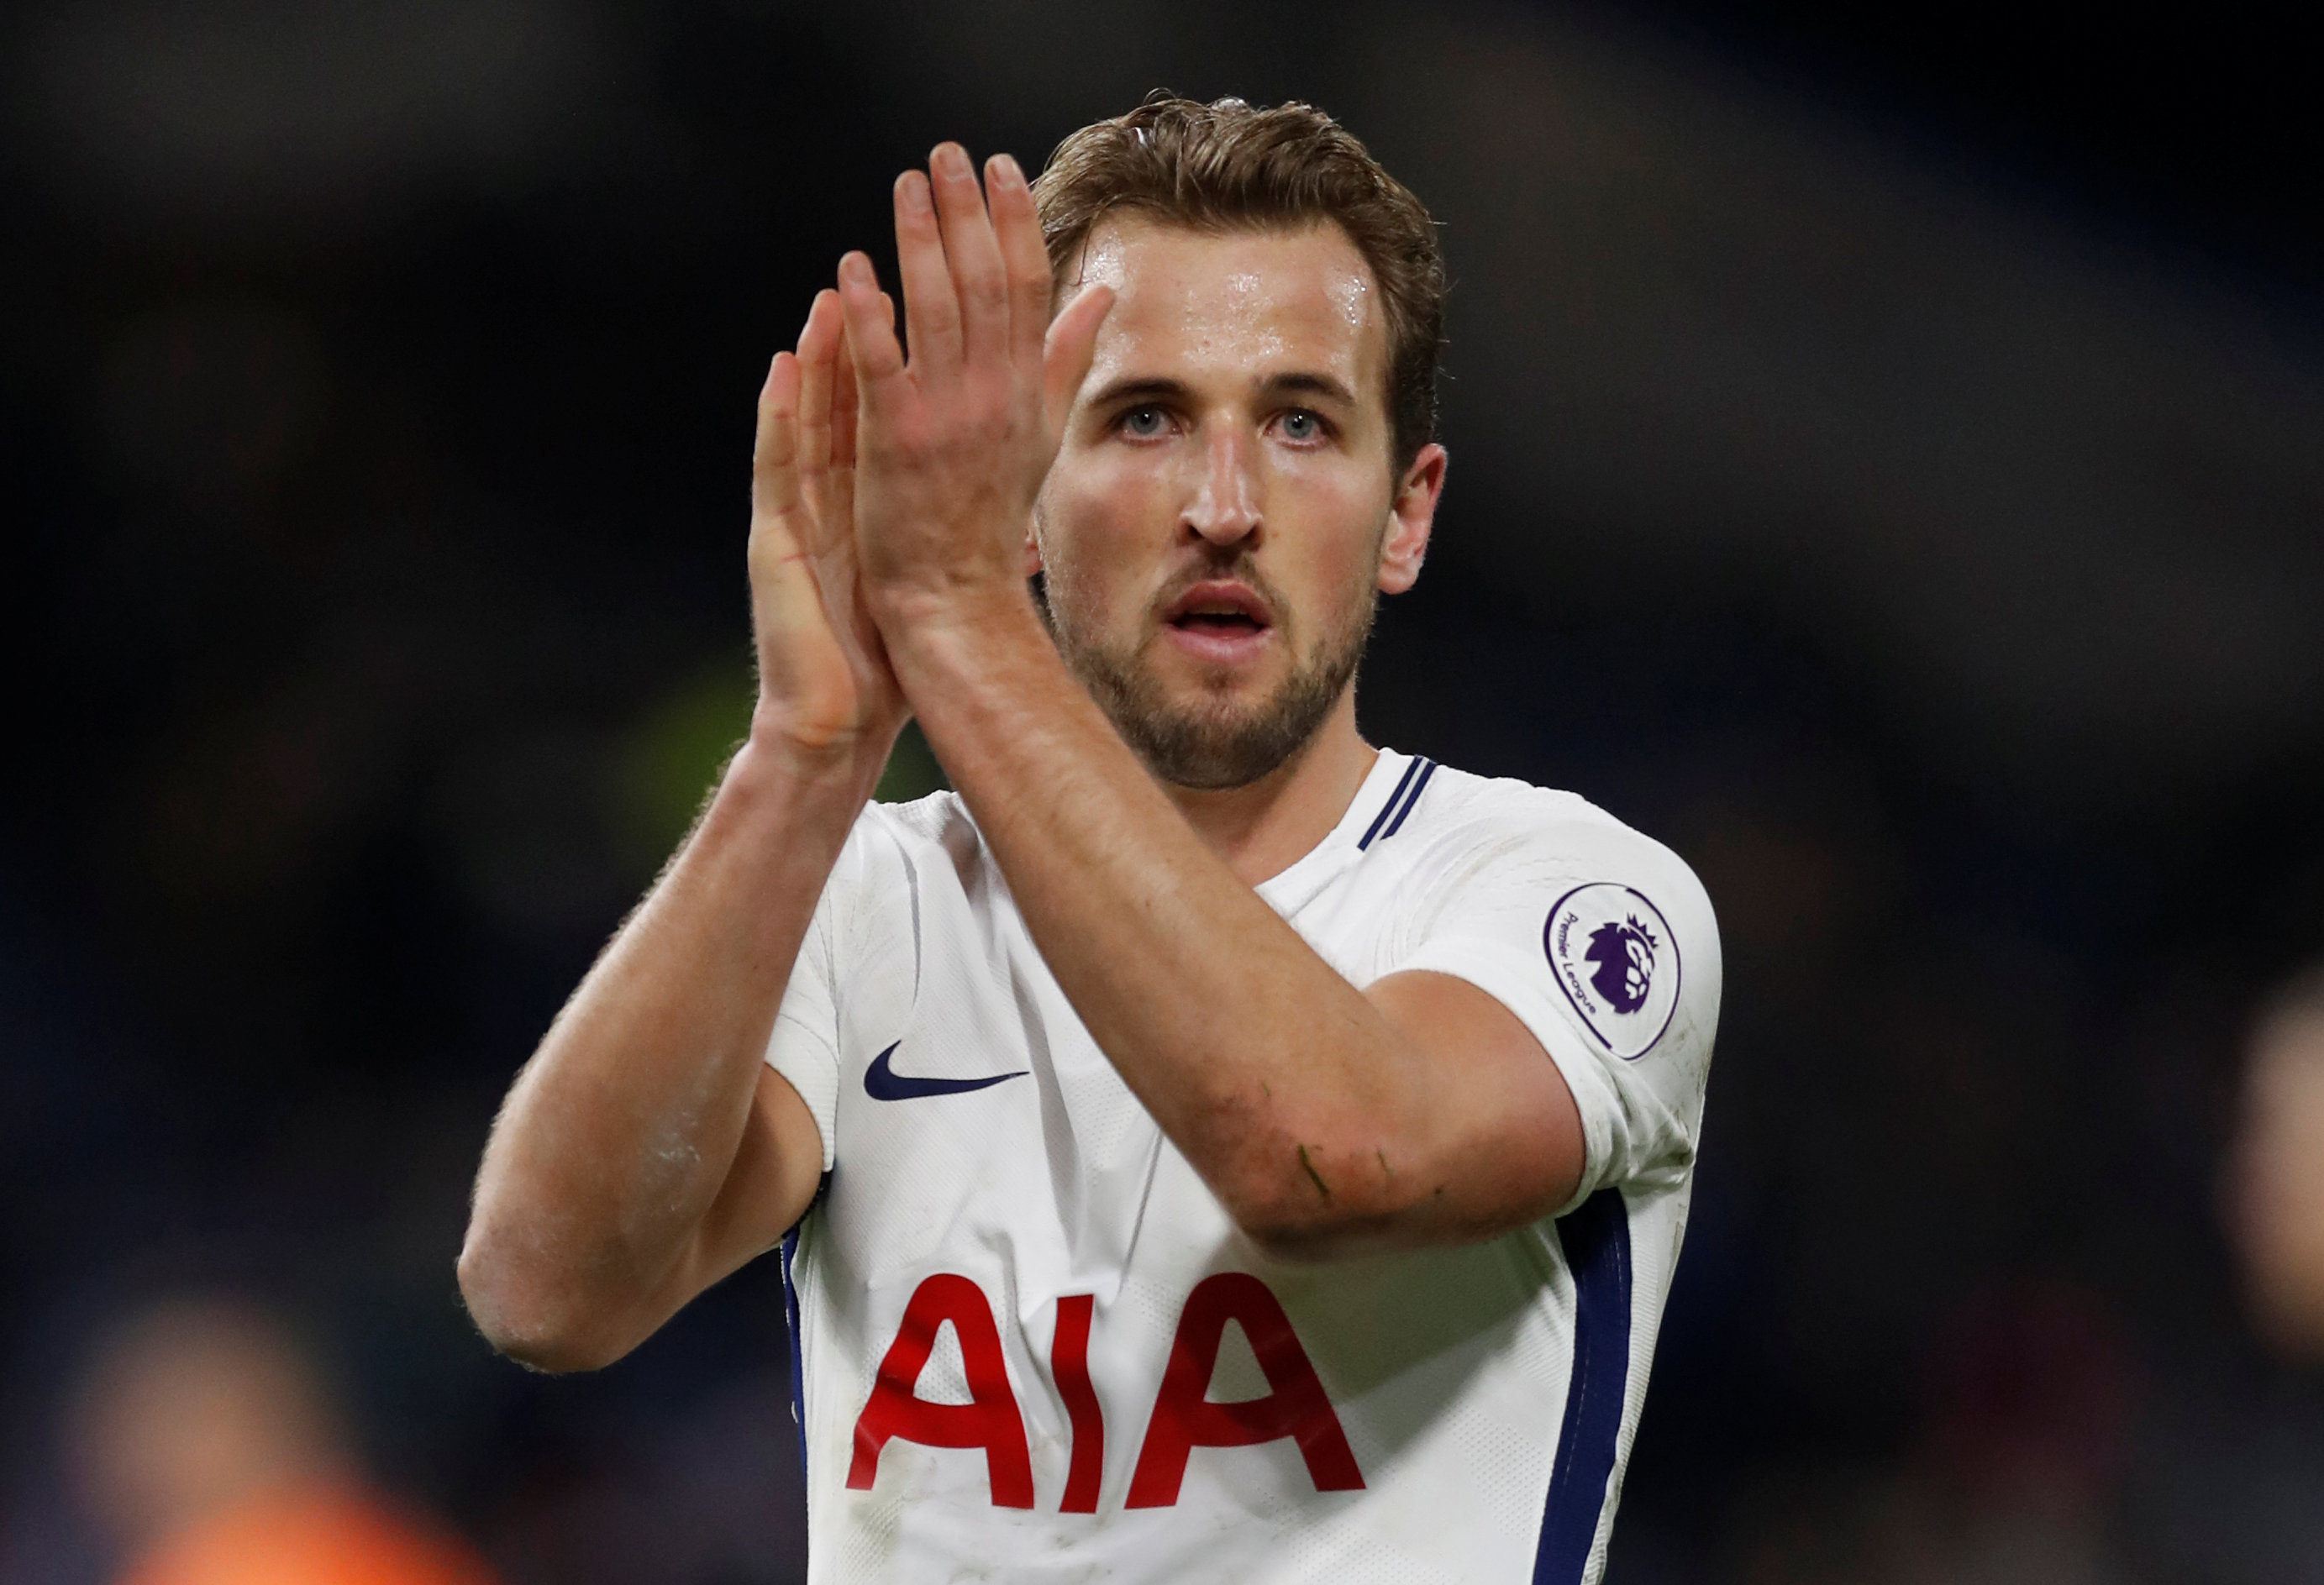 Kane has Messi tally in sights after latest hat-trick